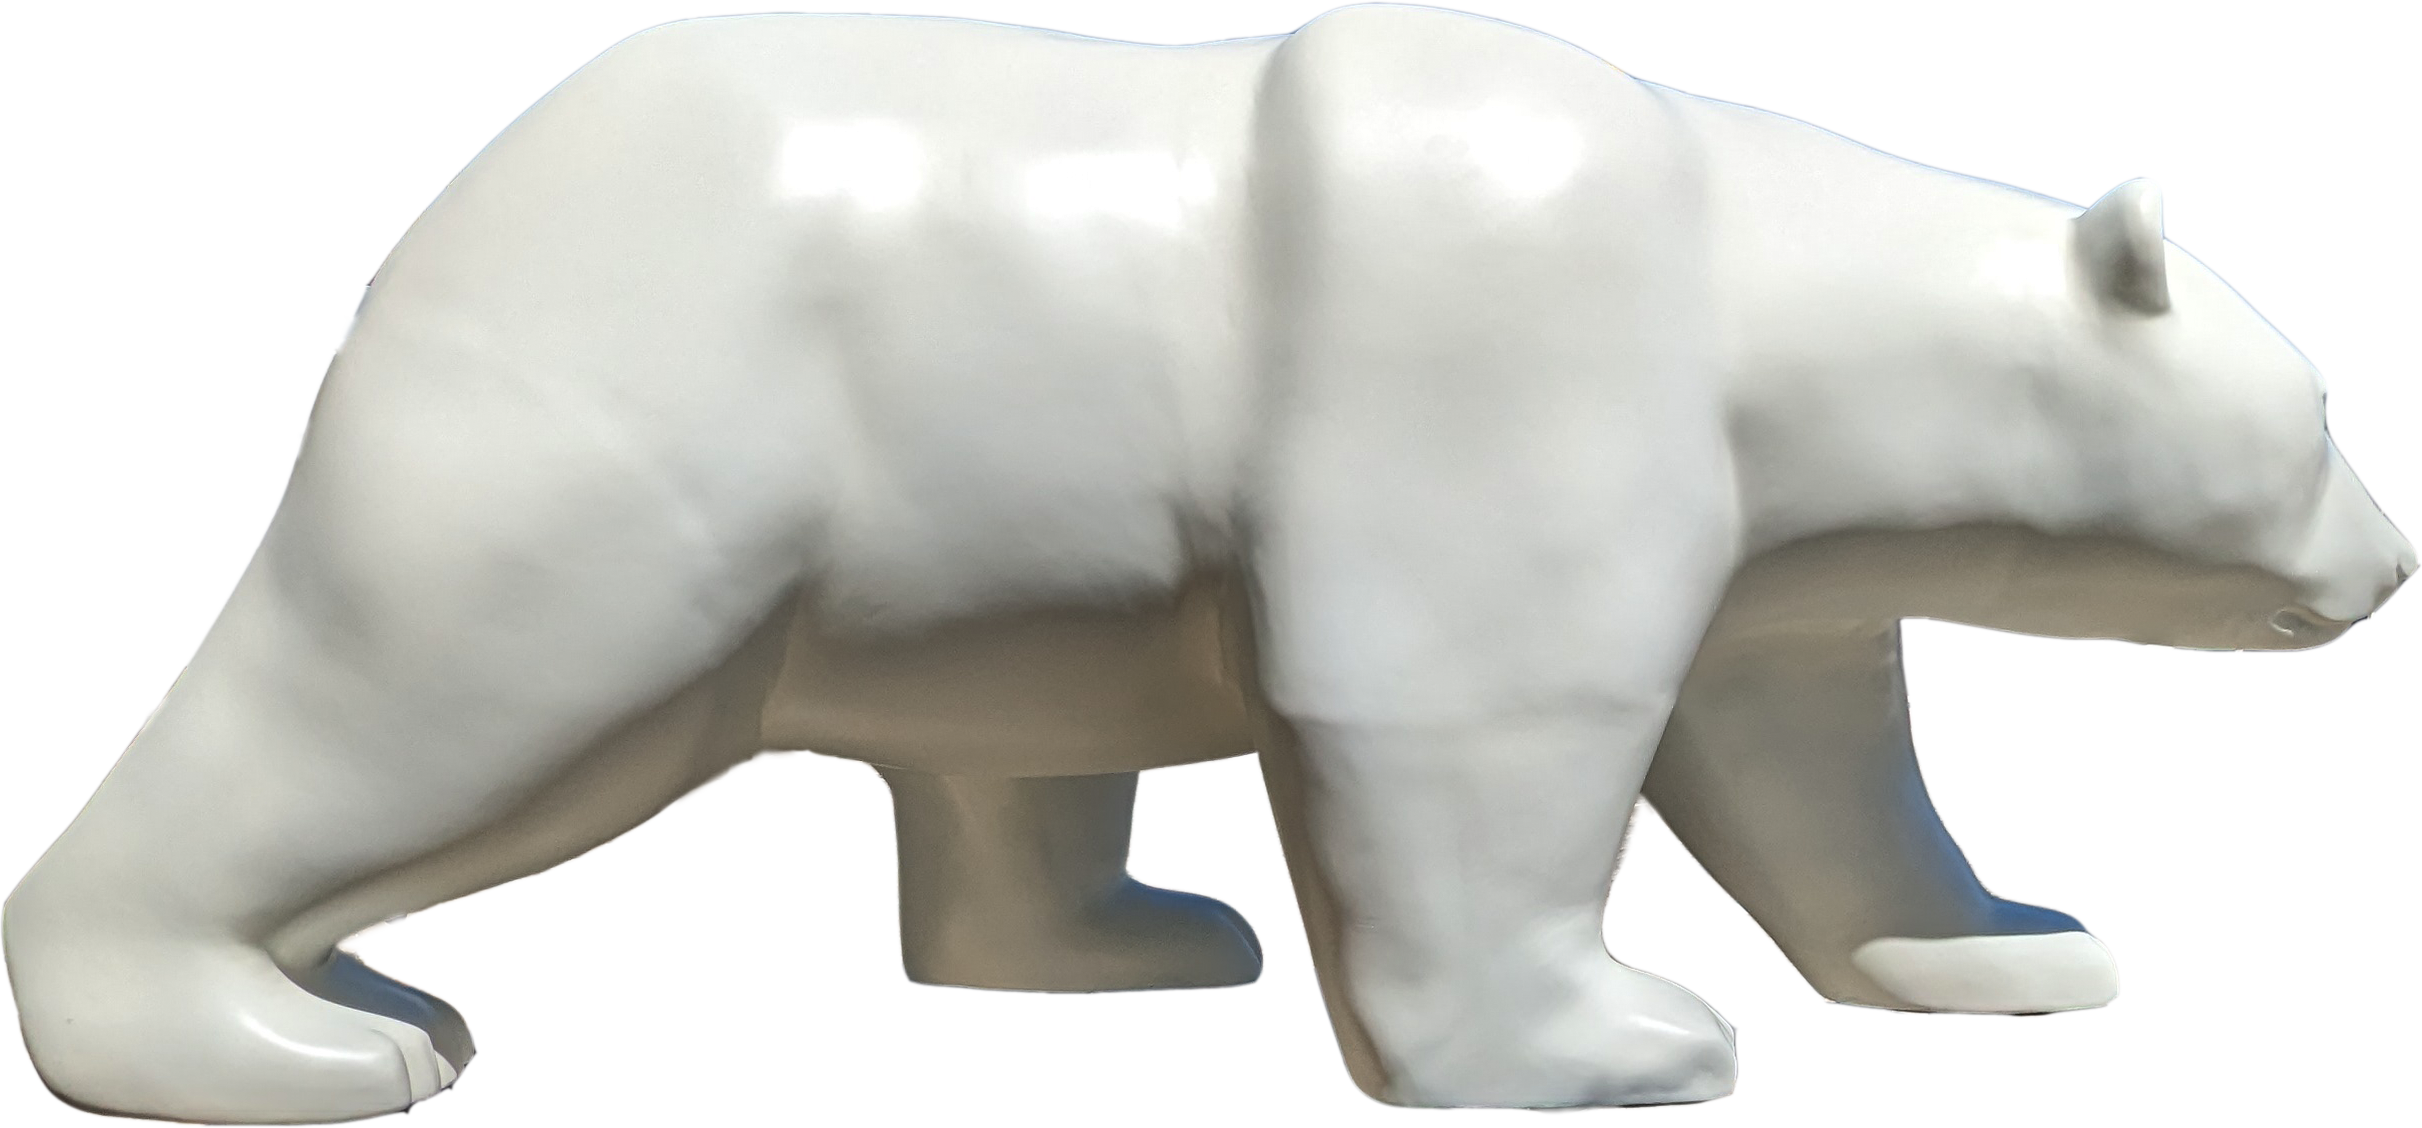 Grand-Ours aluminium-cast-walking-bear 動物画 Thierry Bisch Contemporary painter animals painting art  nature biodiversity conservation